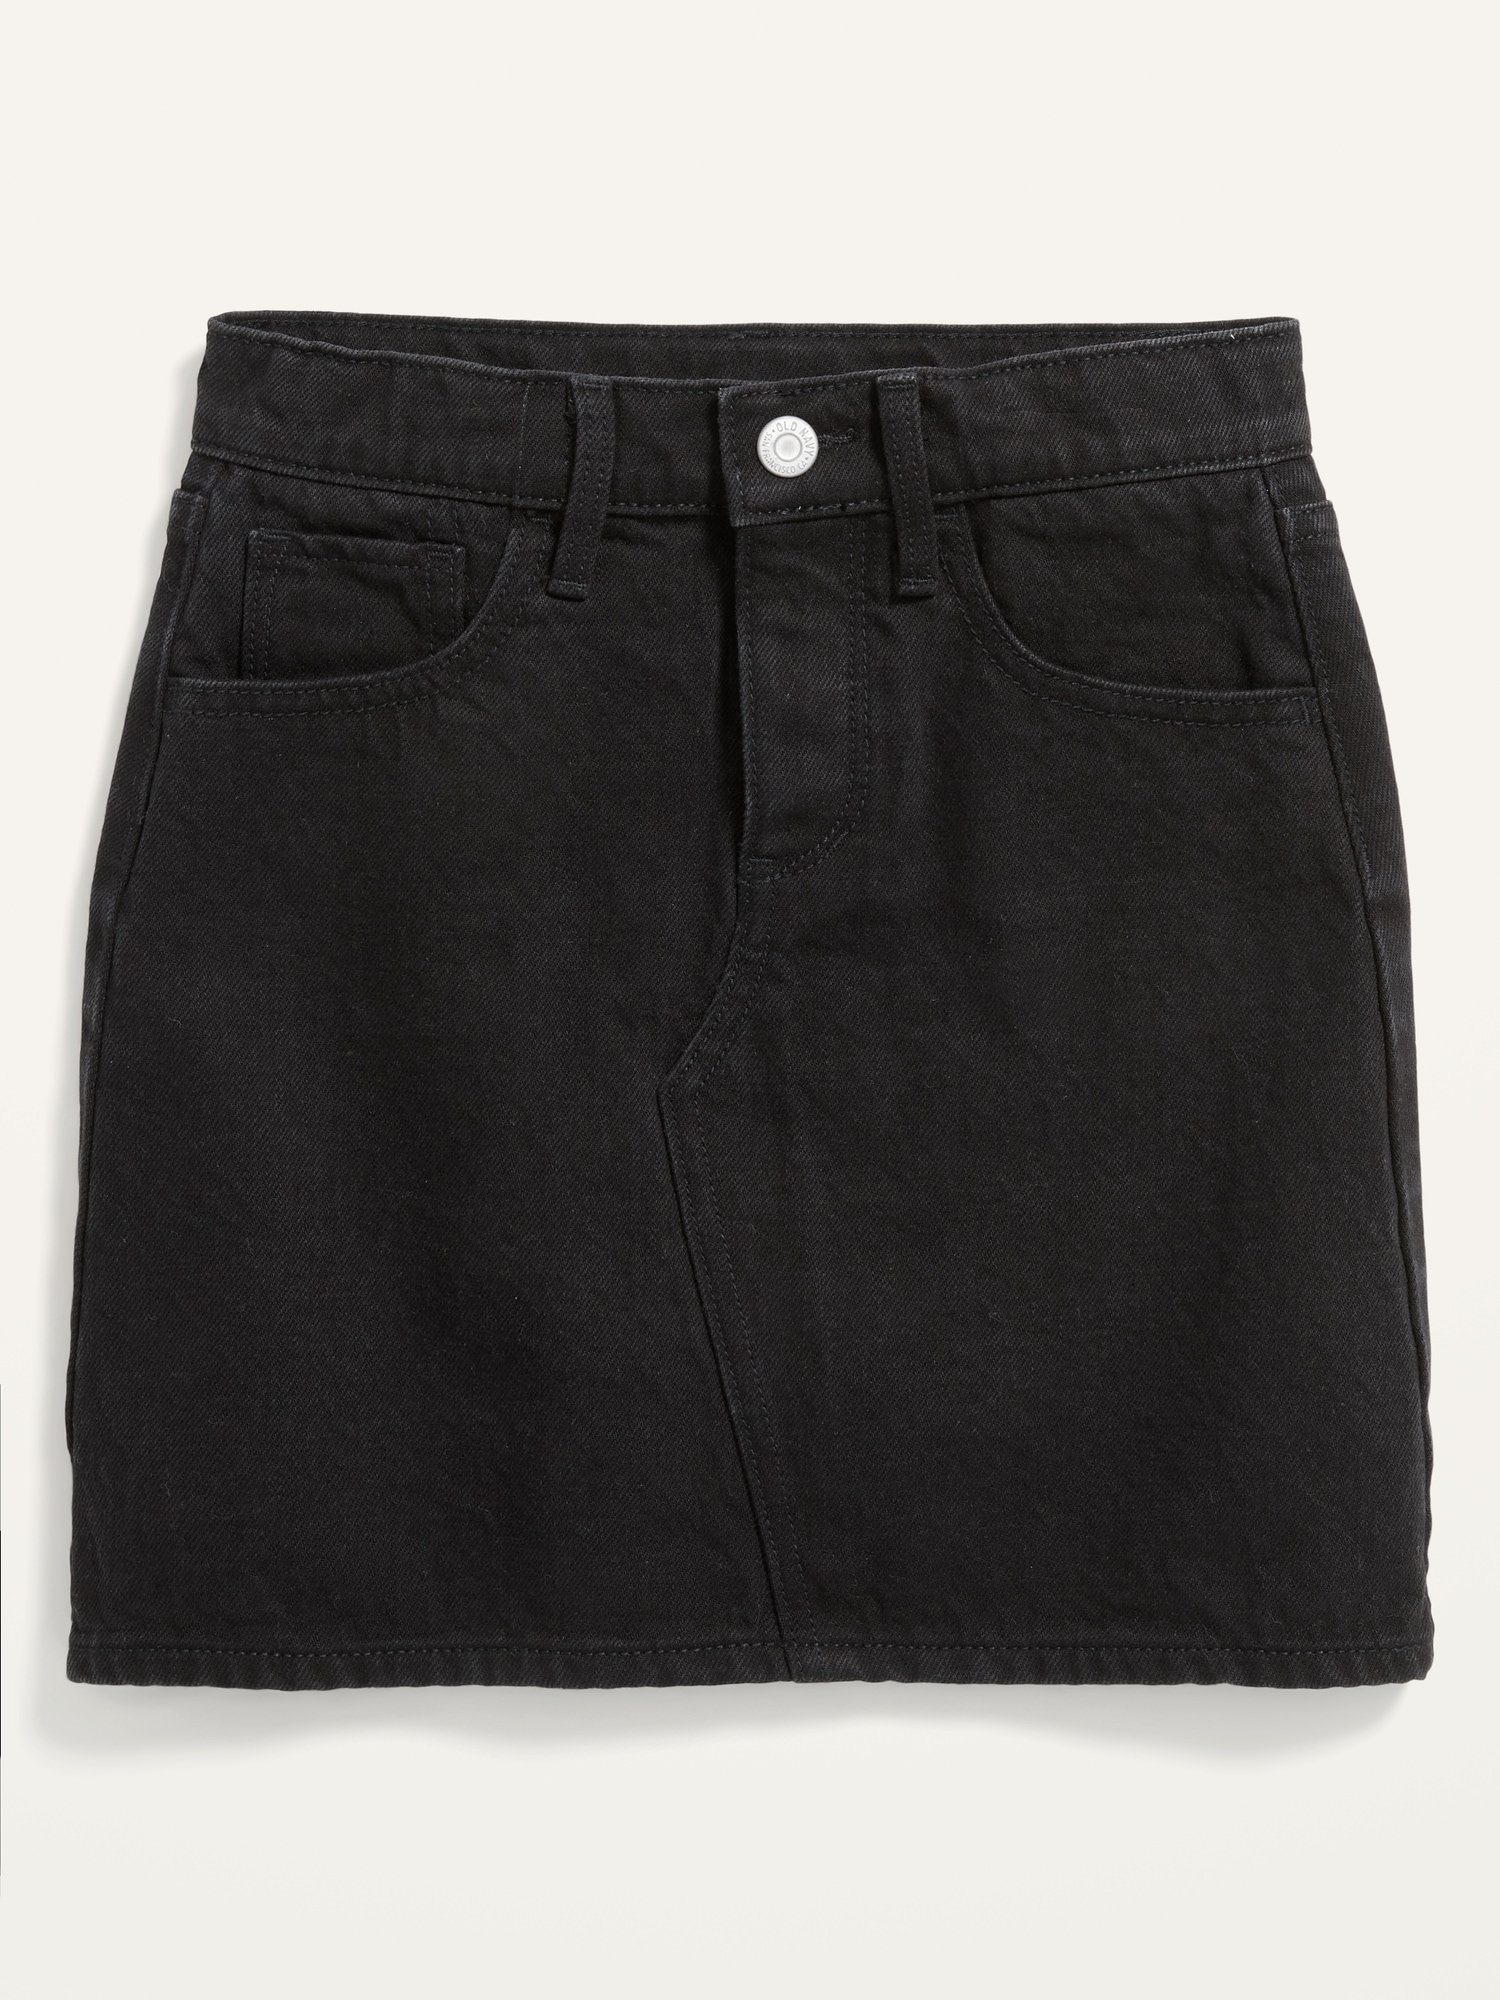 Browse denim skirts from Noisy May online